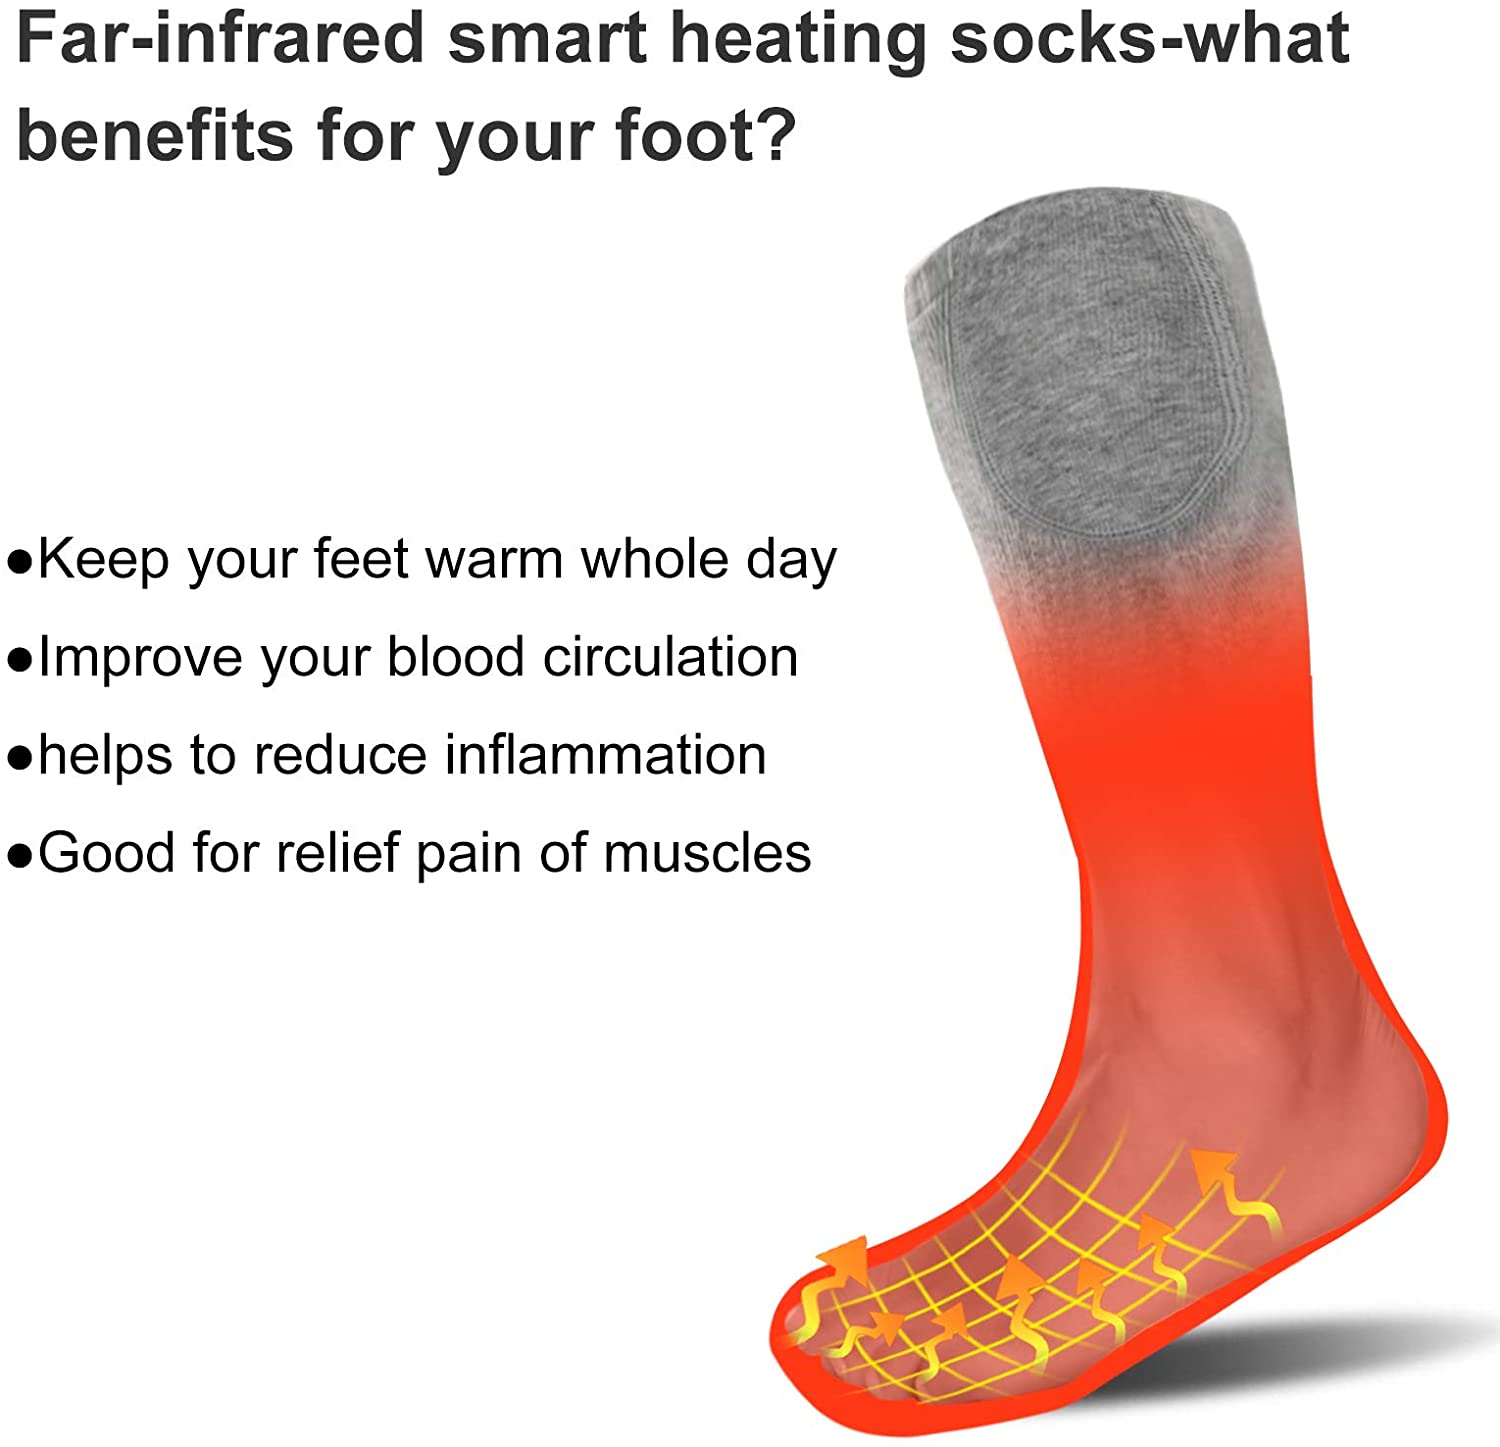 Heated Socks Rechargeable Battery Heating Socks Thermal Thick Windproof Socks Foot Warmer in Cold Weather - e4cents